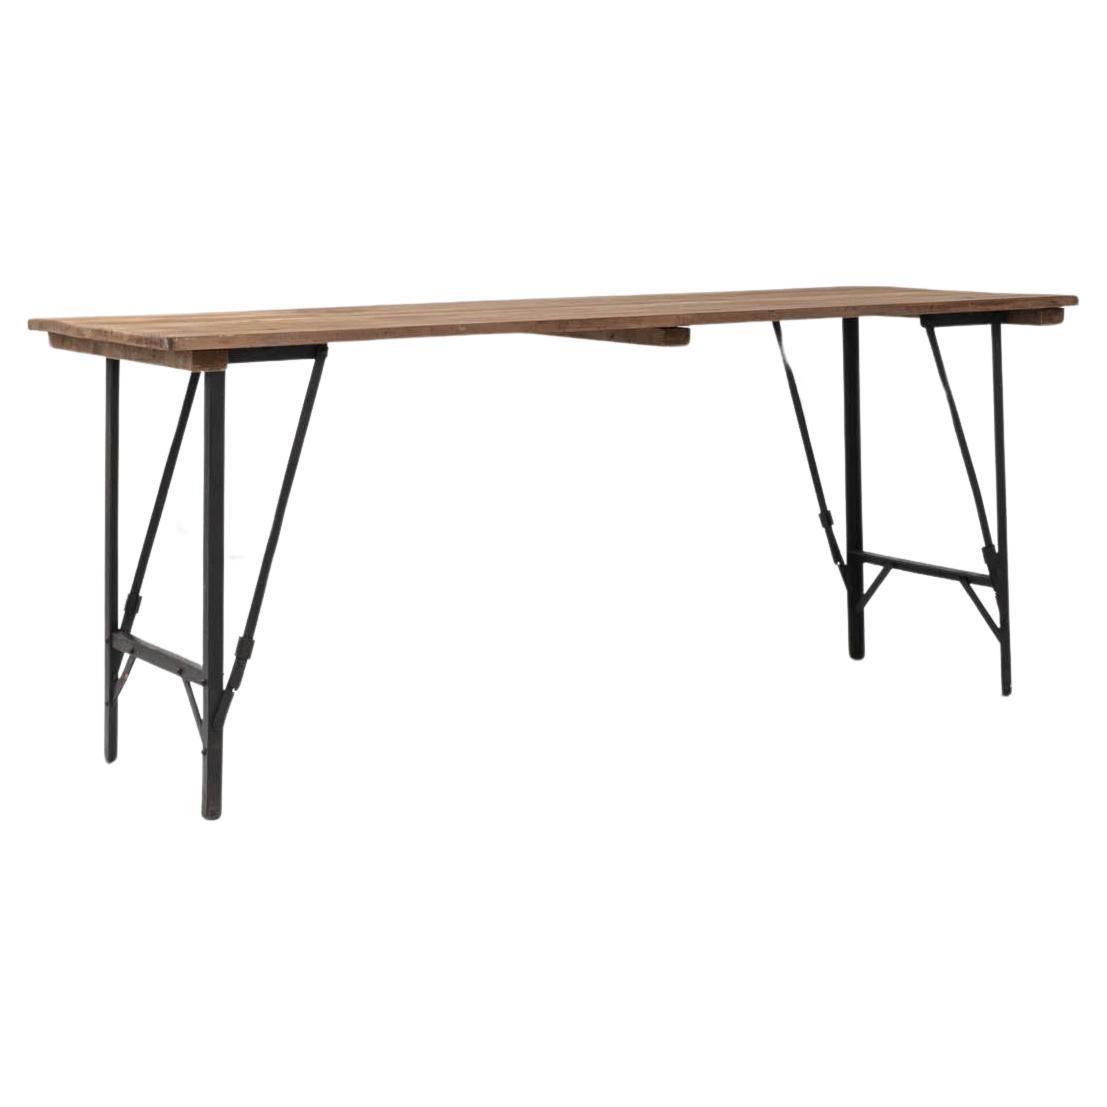 20th Century Belgian Metal Folding Table with Wooden Top For Sale